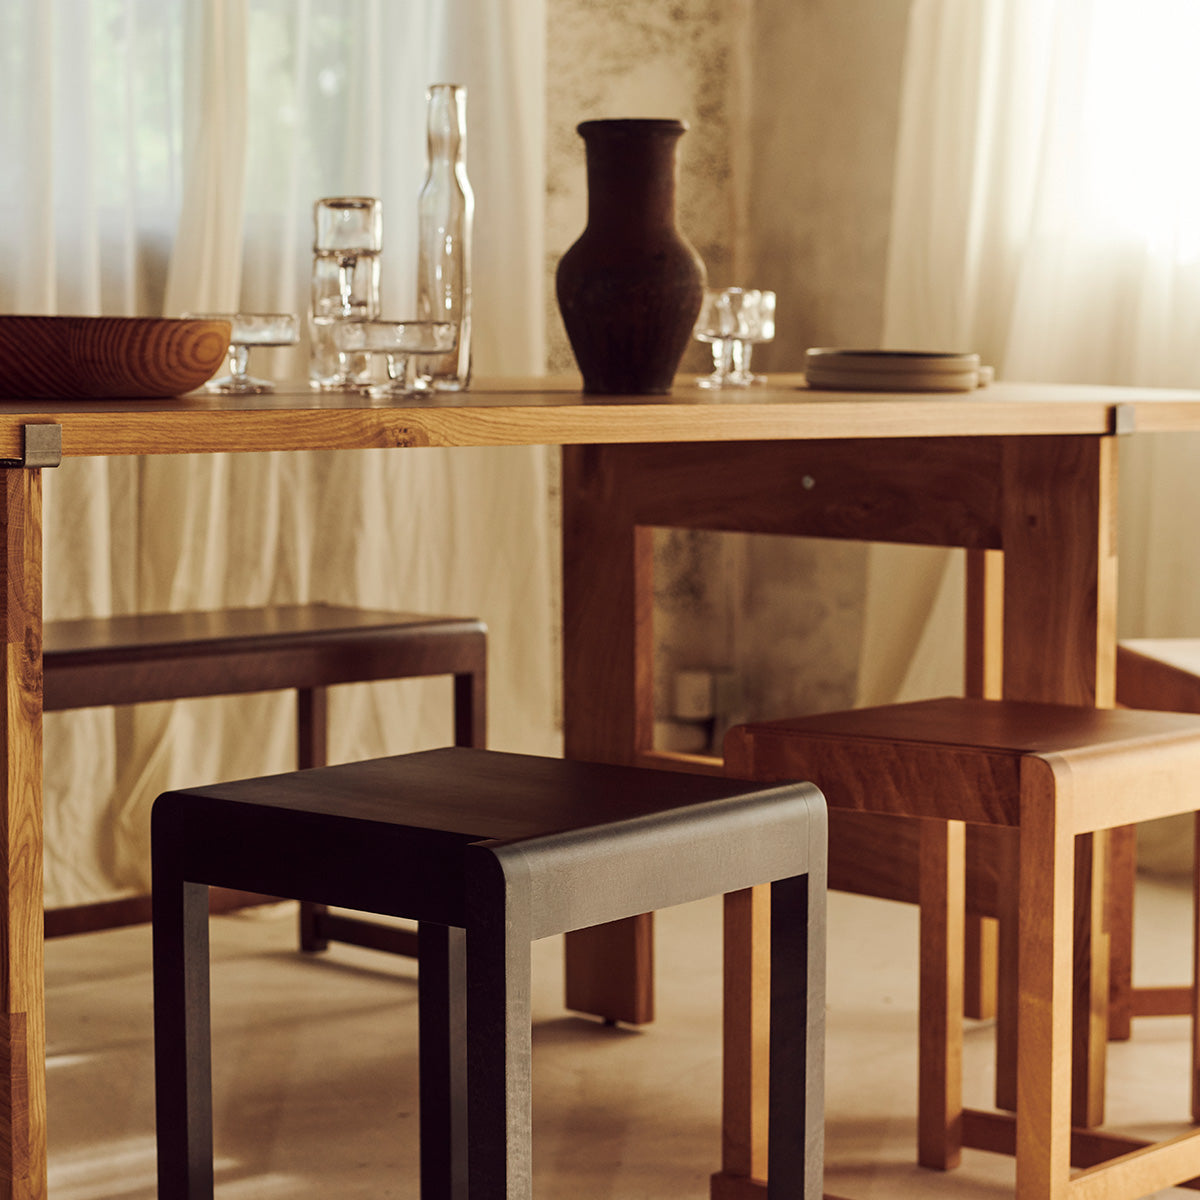 Frama low stool 01 with a table setting